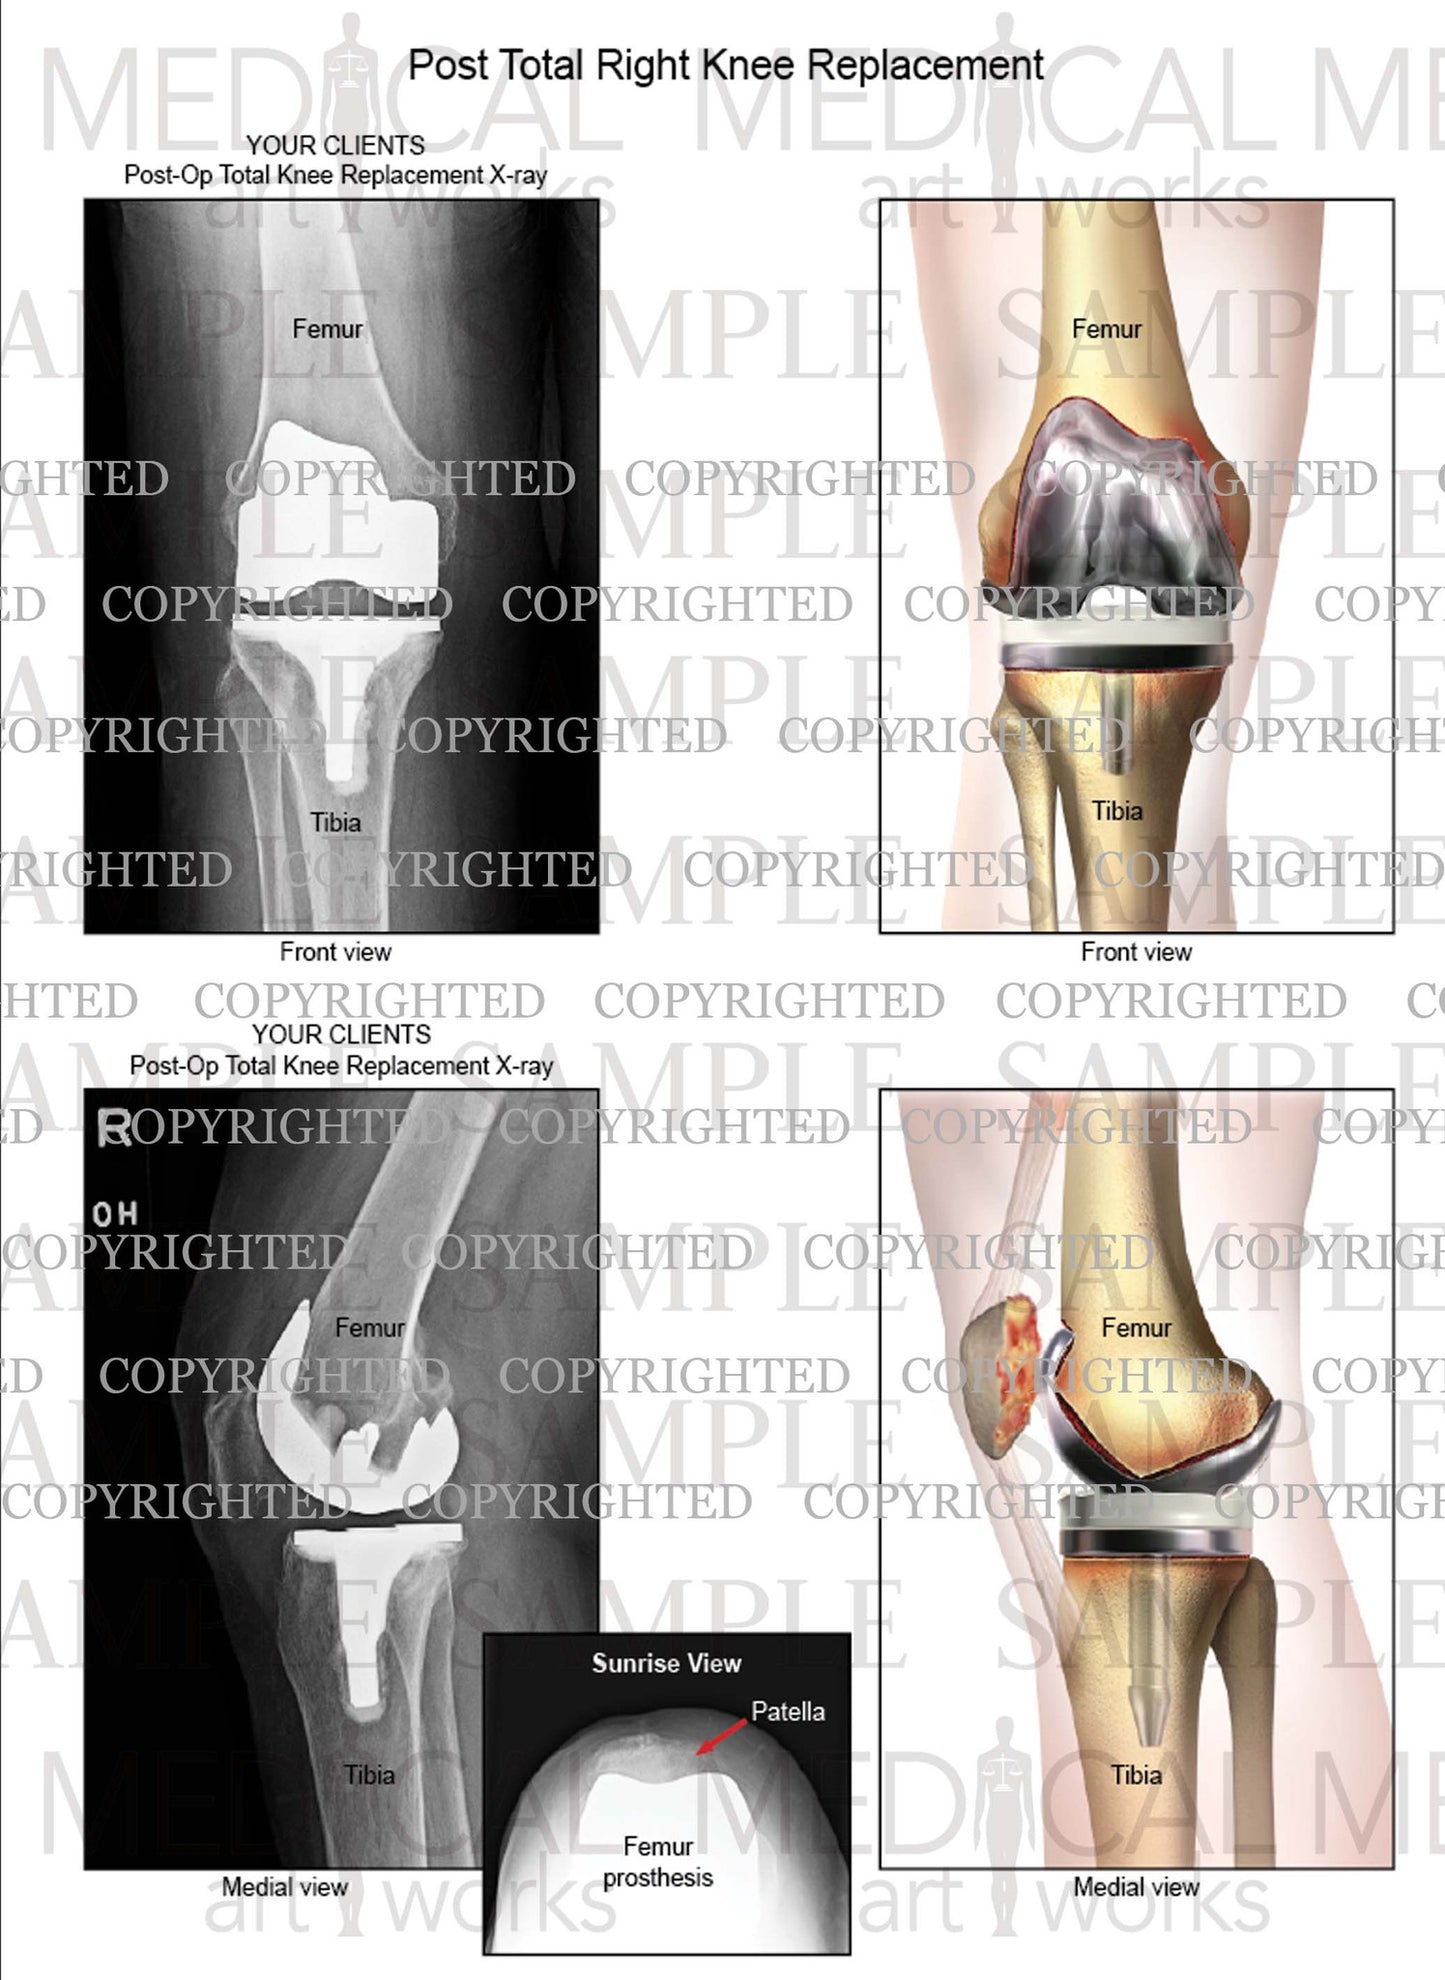 Right Knee Total Knee Replacement - Post-op - x-rays